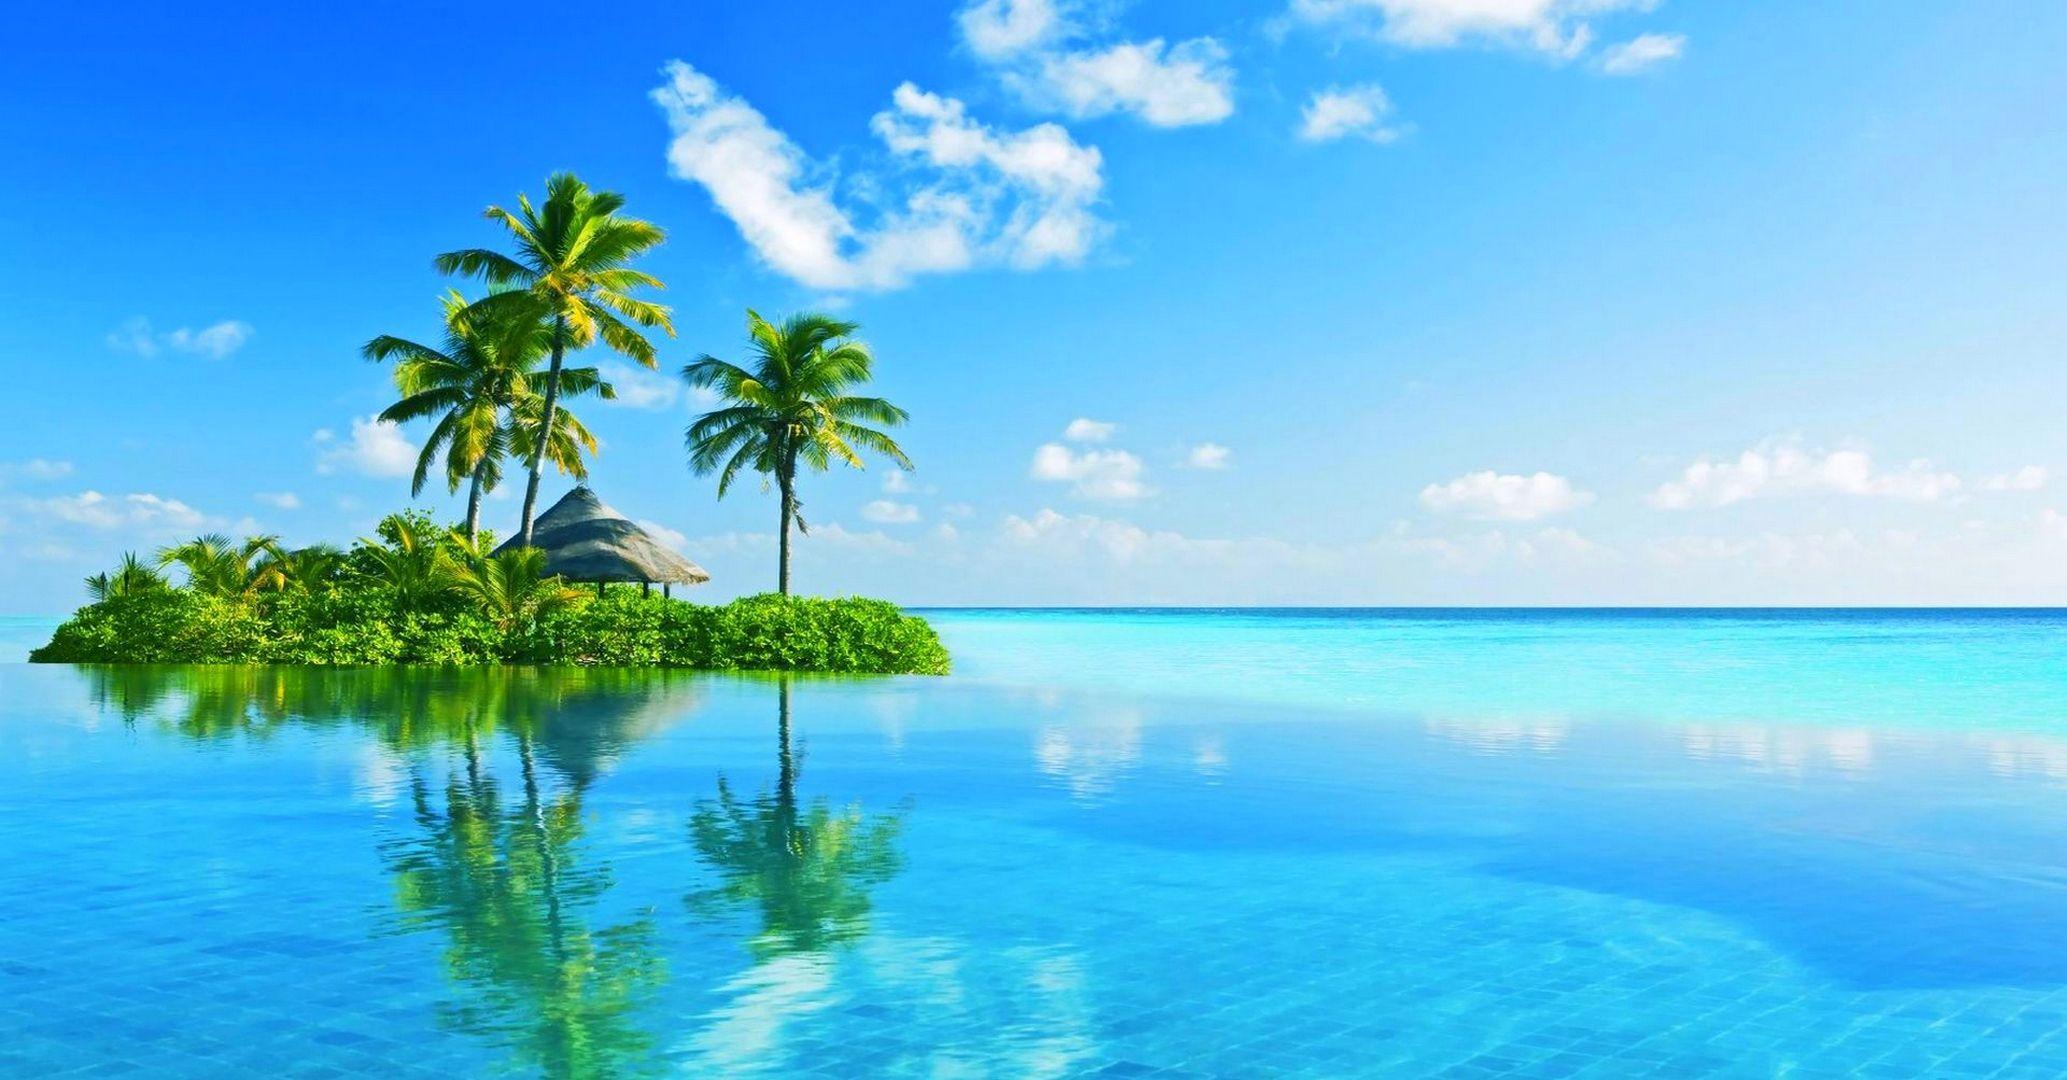 Tropical Island Paradise Wallpapers - Top Free Tropical Island Paradise ...